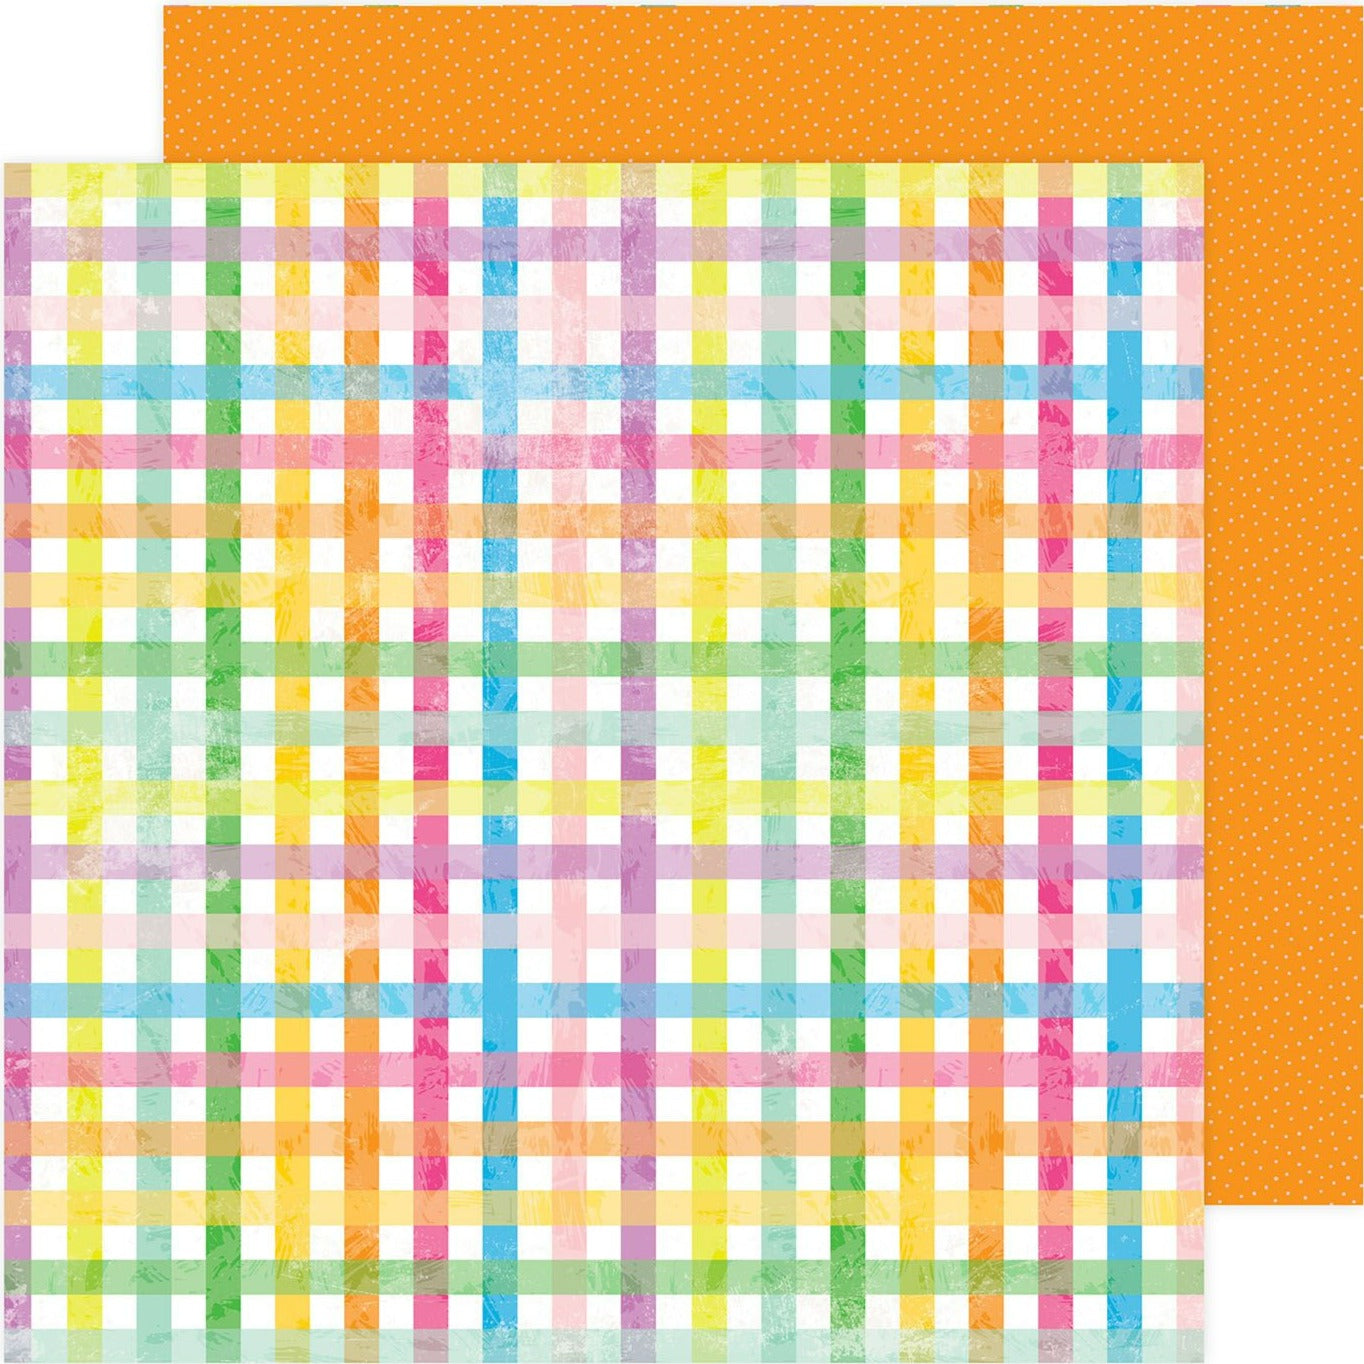 (vibrant plaid on a white background - yellow mini dots on an orange background reverse). 12x12 double-sided paper by Pebbles.